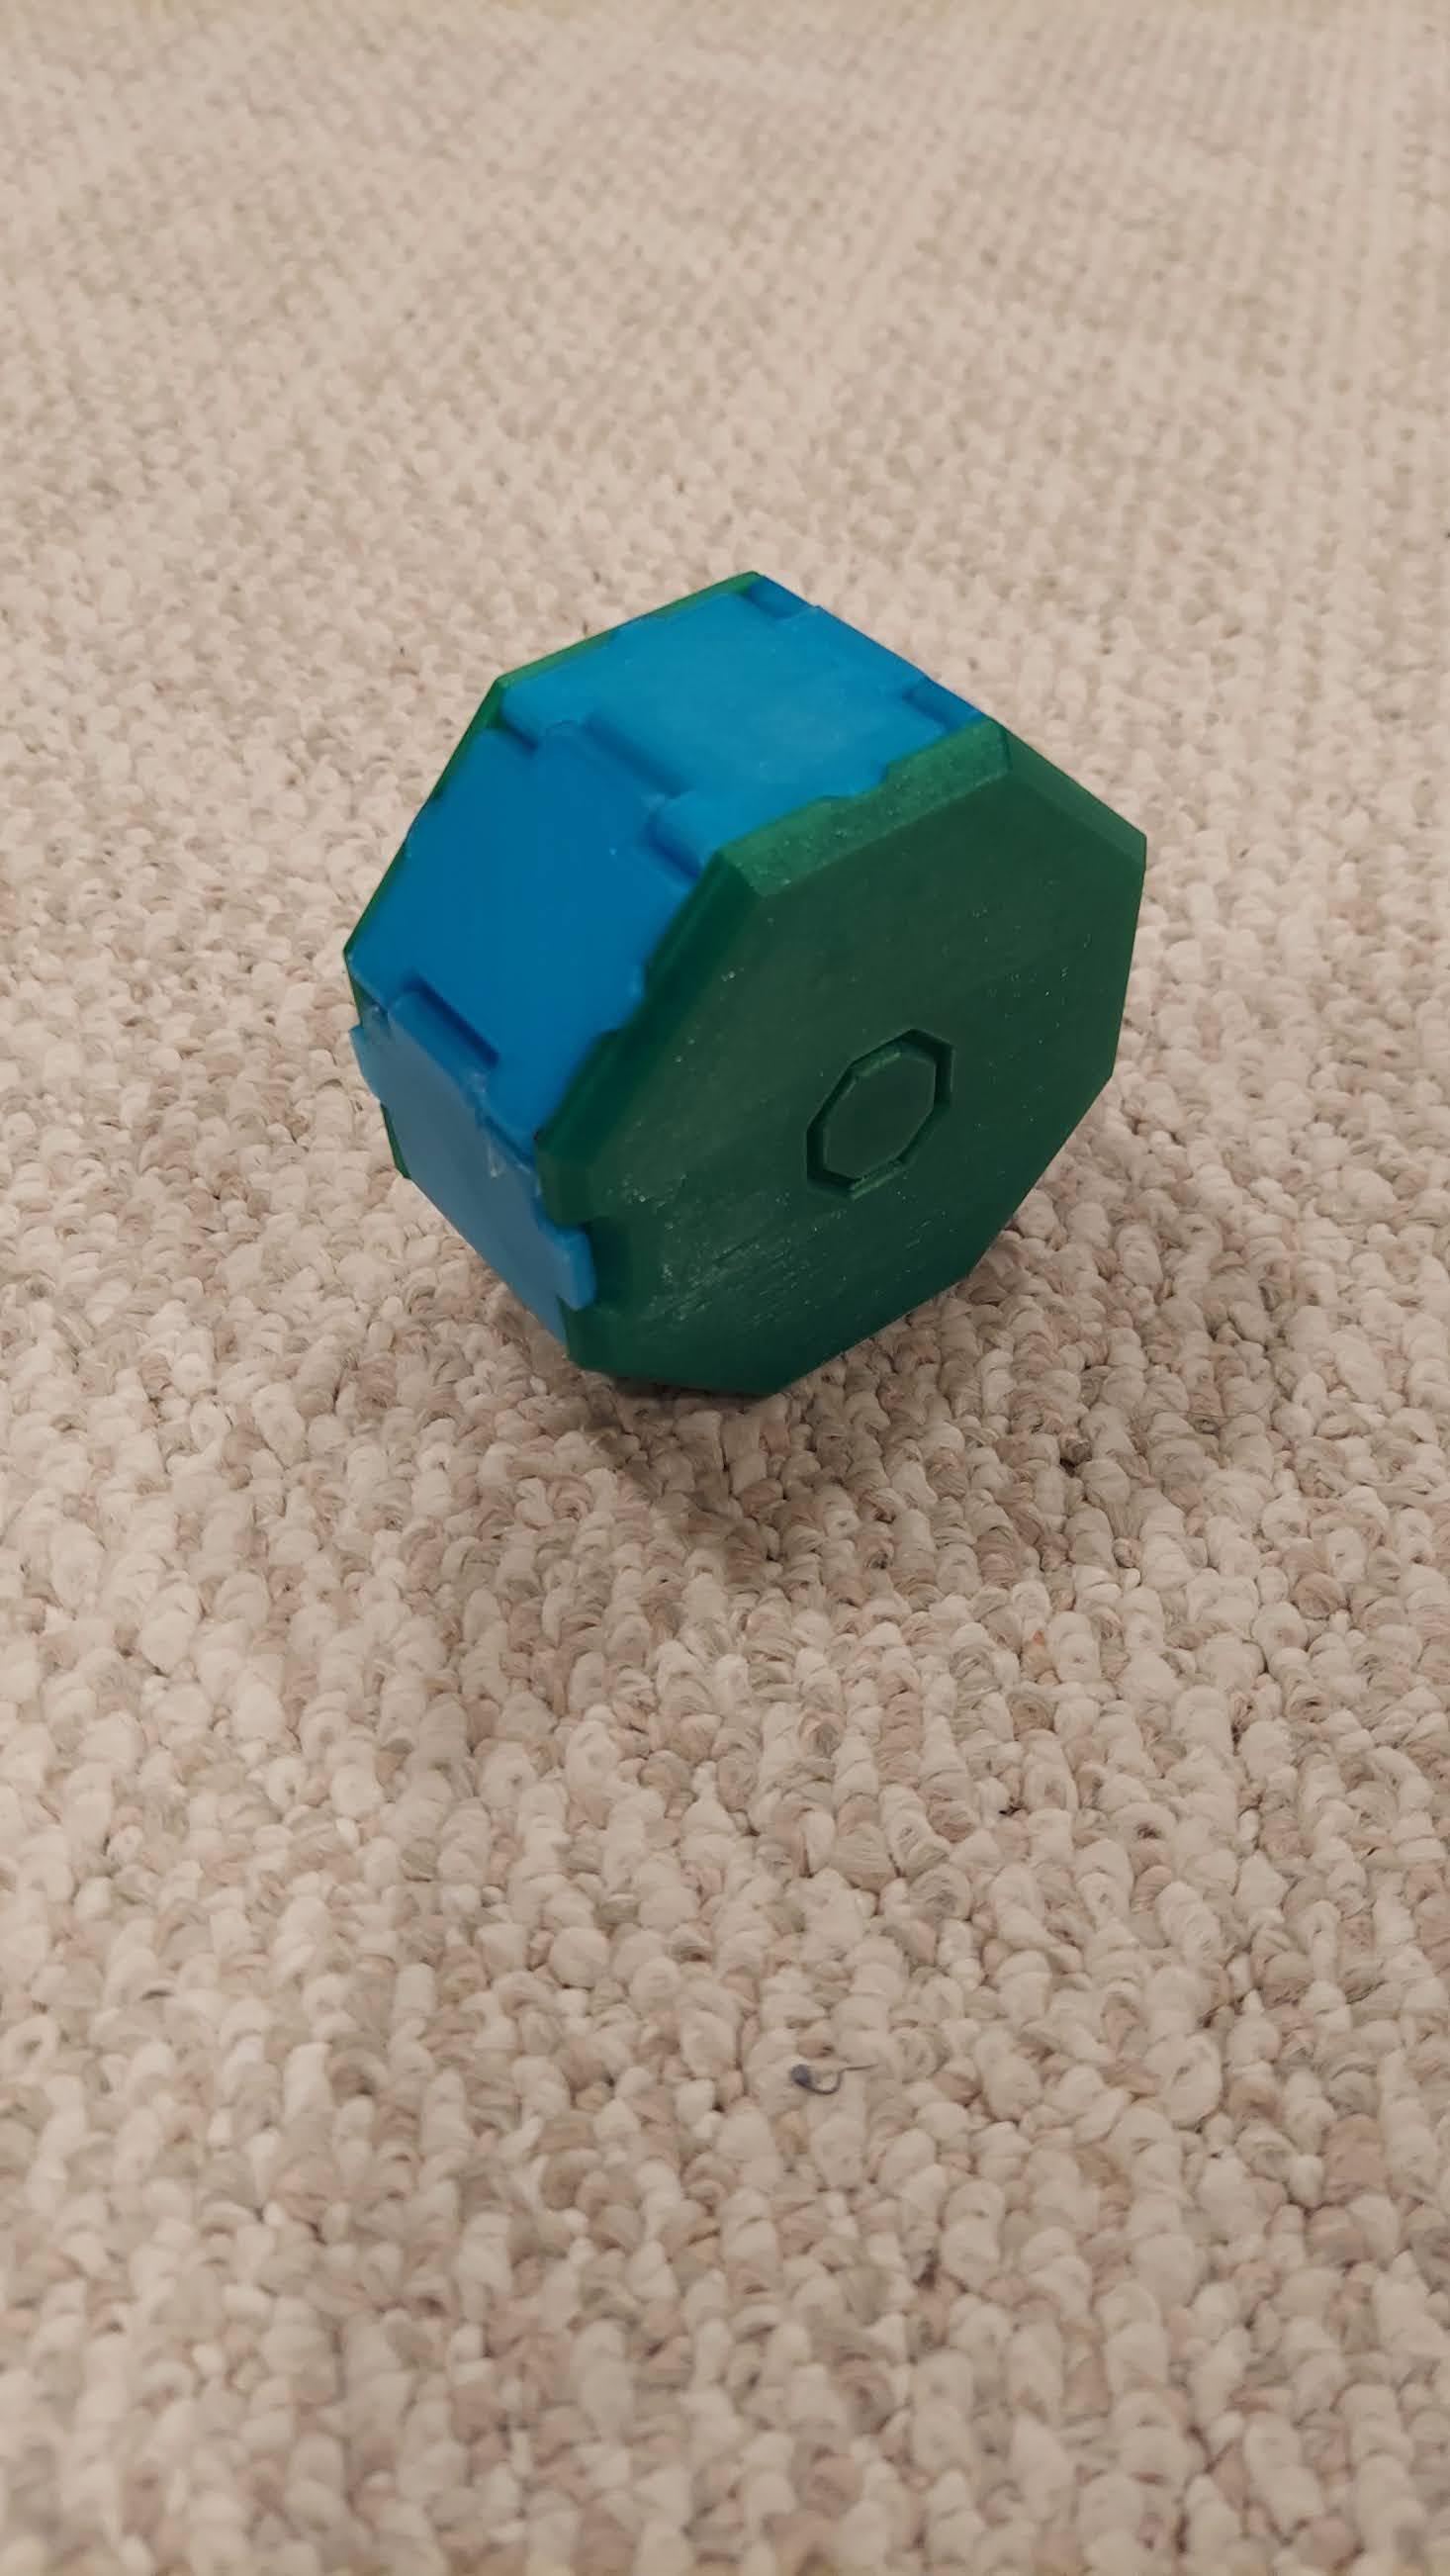 Rolling Storage Box - A small storage octagon, perfect for my ever increasing collection of screws. I found this model thanks to Zack Freedman!

Printed in Cold Fusion Blue and Tritium Green - 3d model